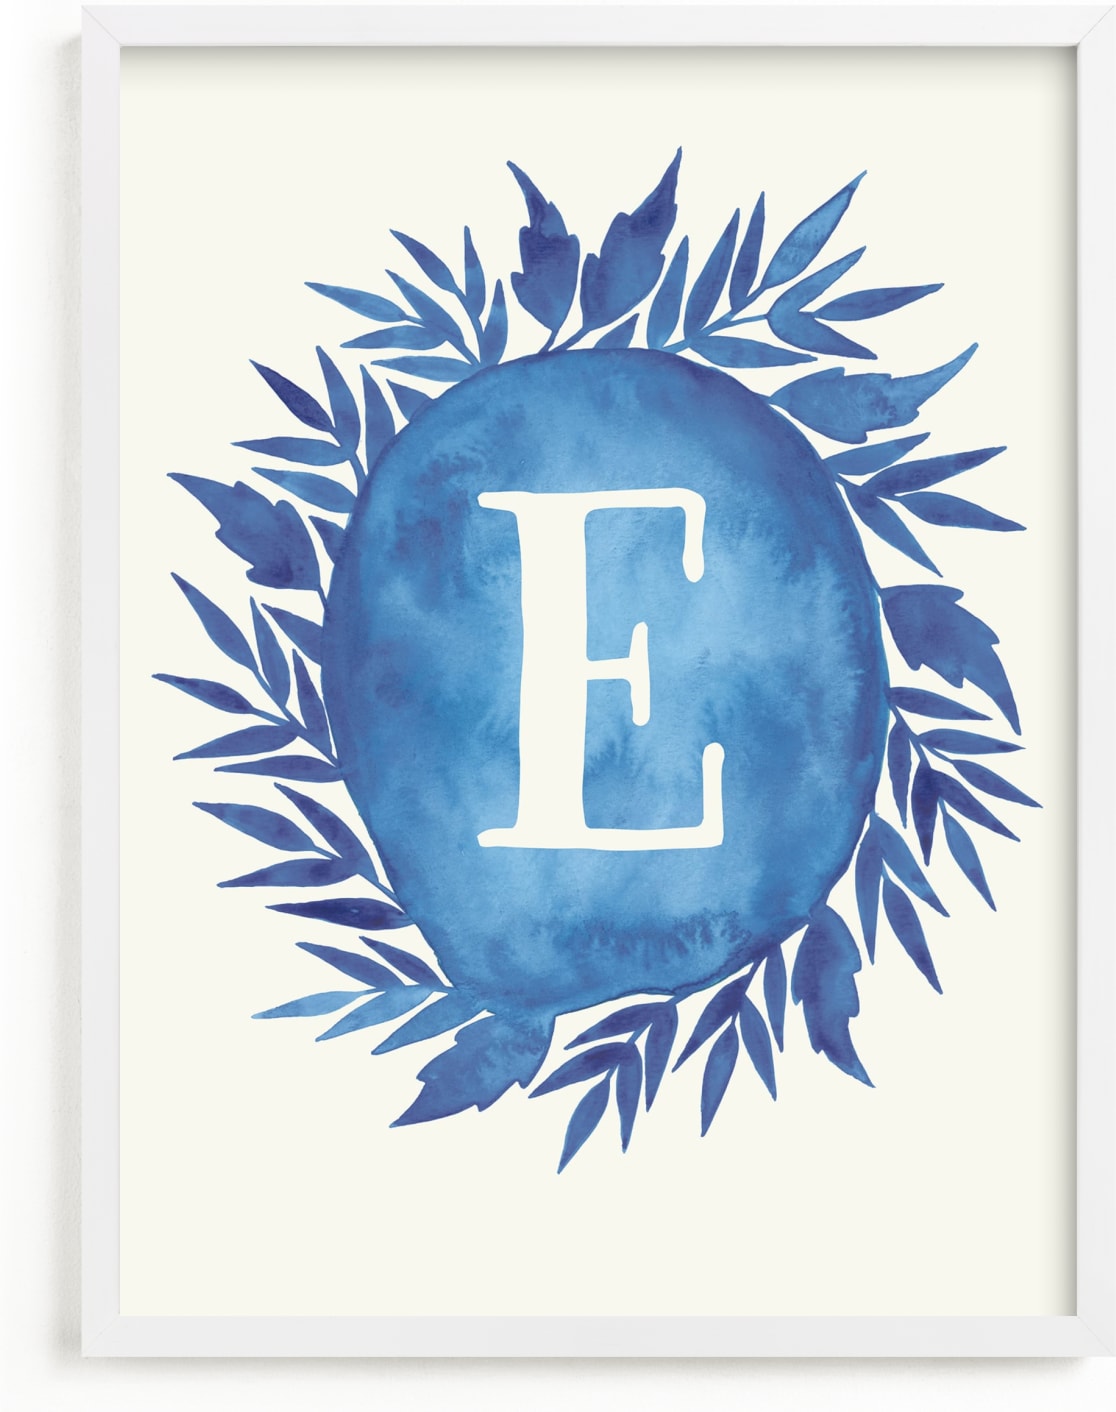 This is a blue personalized art for kid by Katharine Watson called Watercolor Initials.